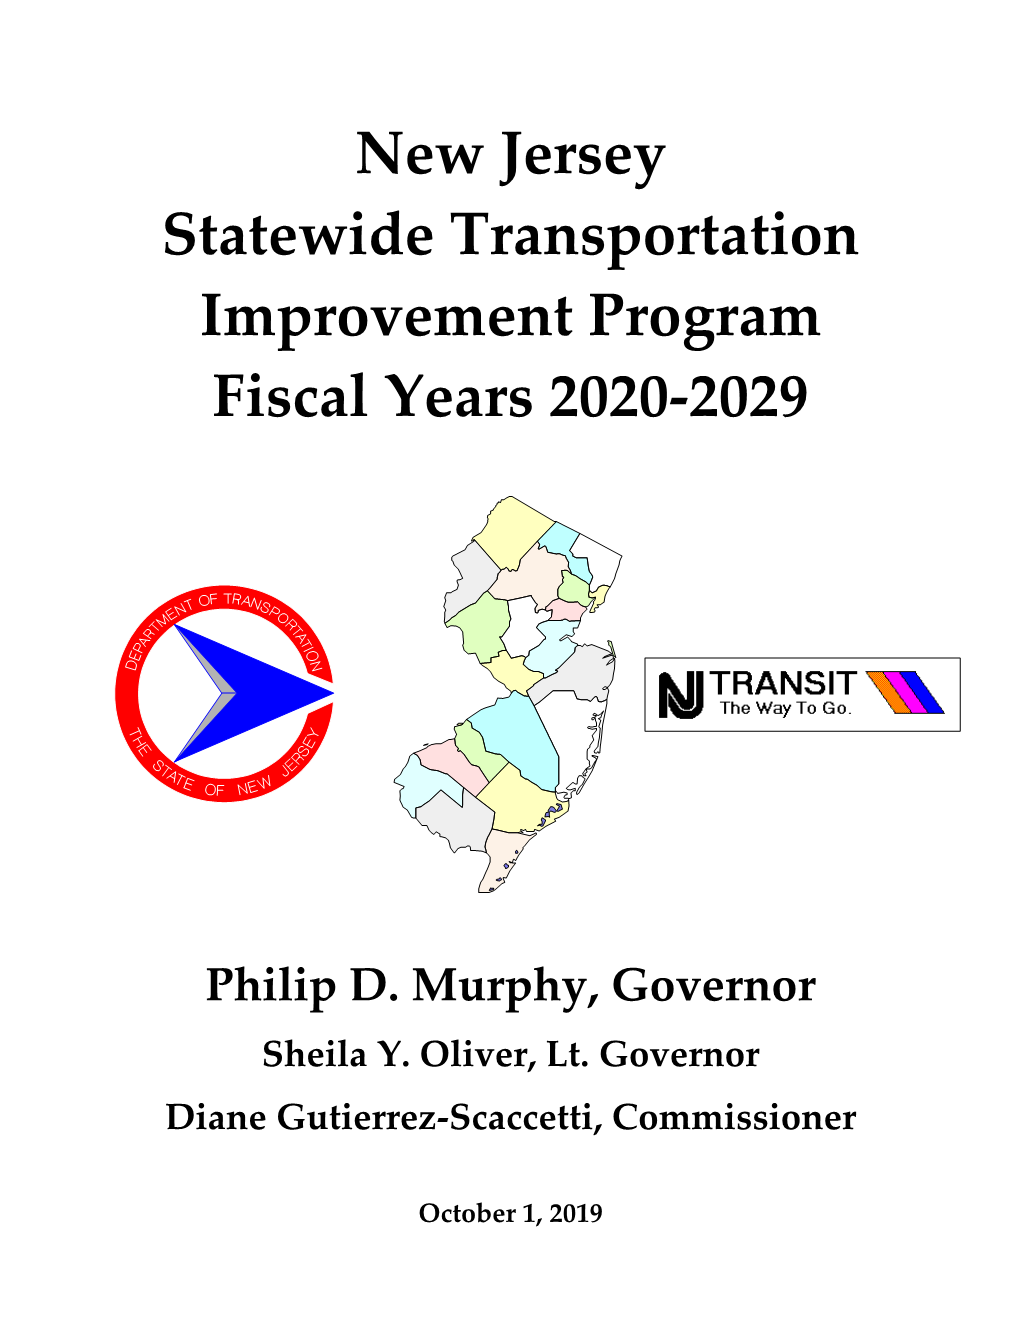 New Jersey Statewide Transportation Improvement Program Fiscal Years 2020-2029